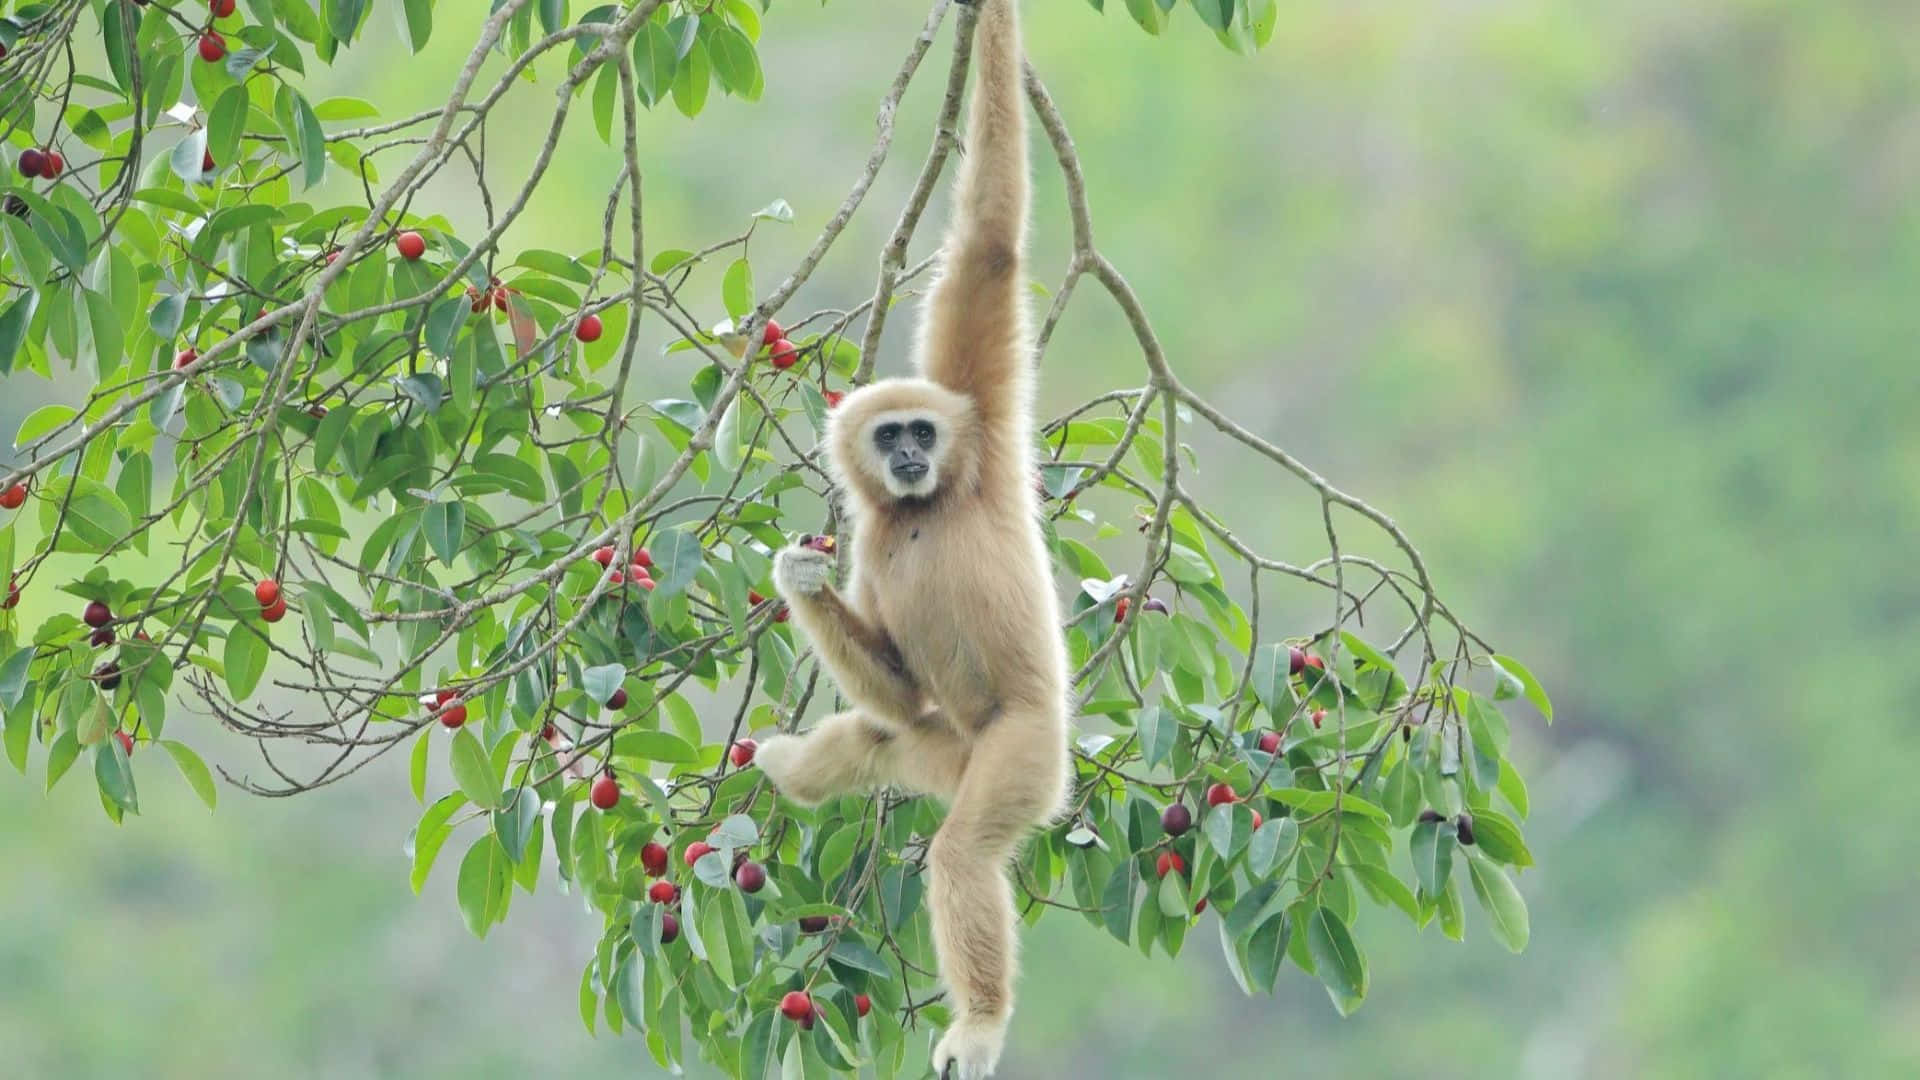 A Gibbon Clinging to a Tree Branch in its Natural Habitat